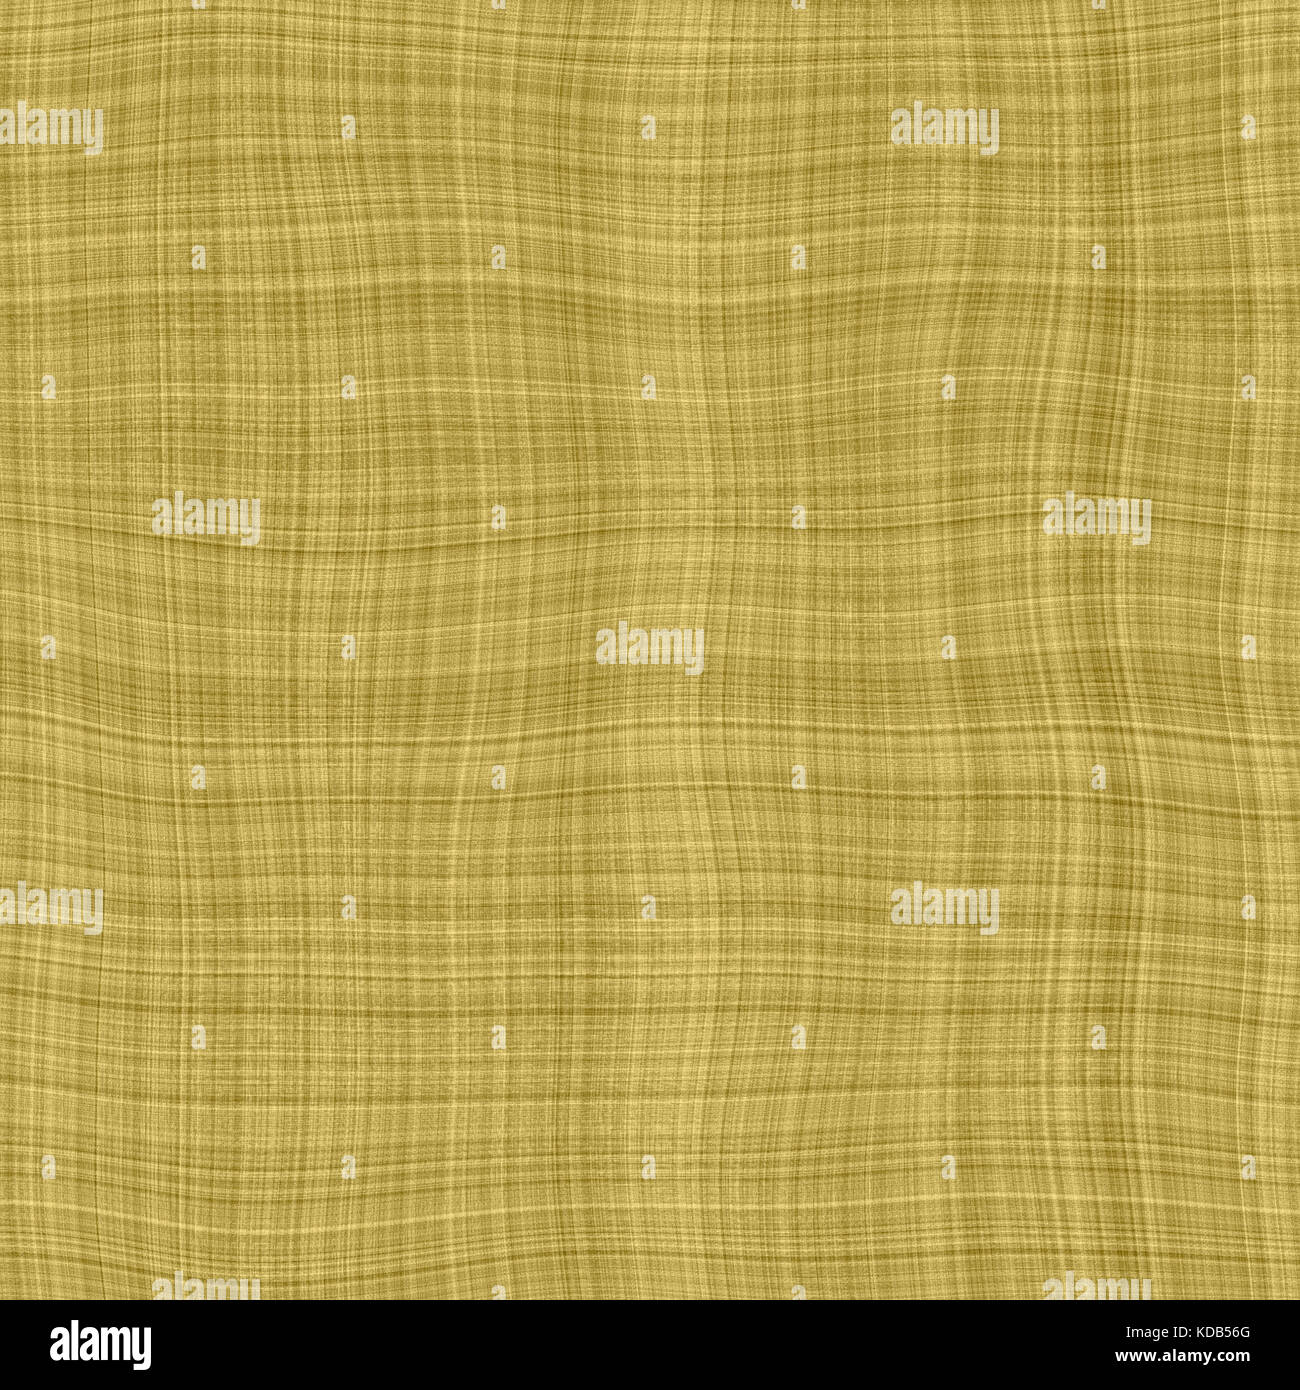 Beige cloth material for background Stock Photo